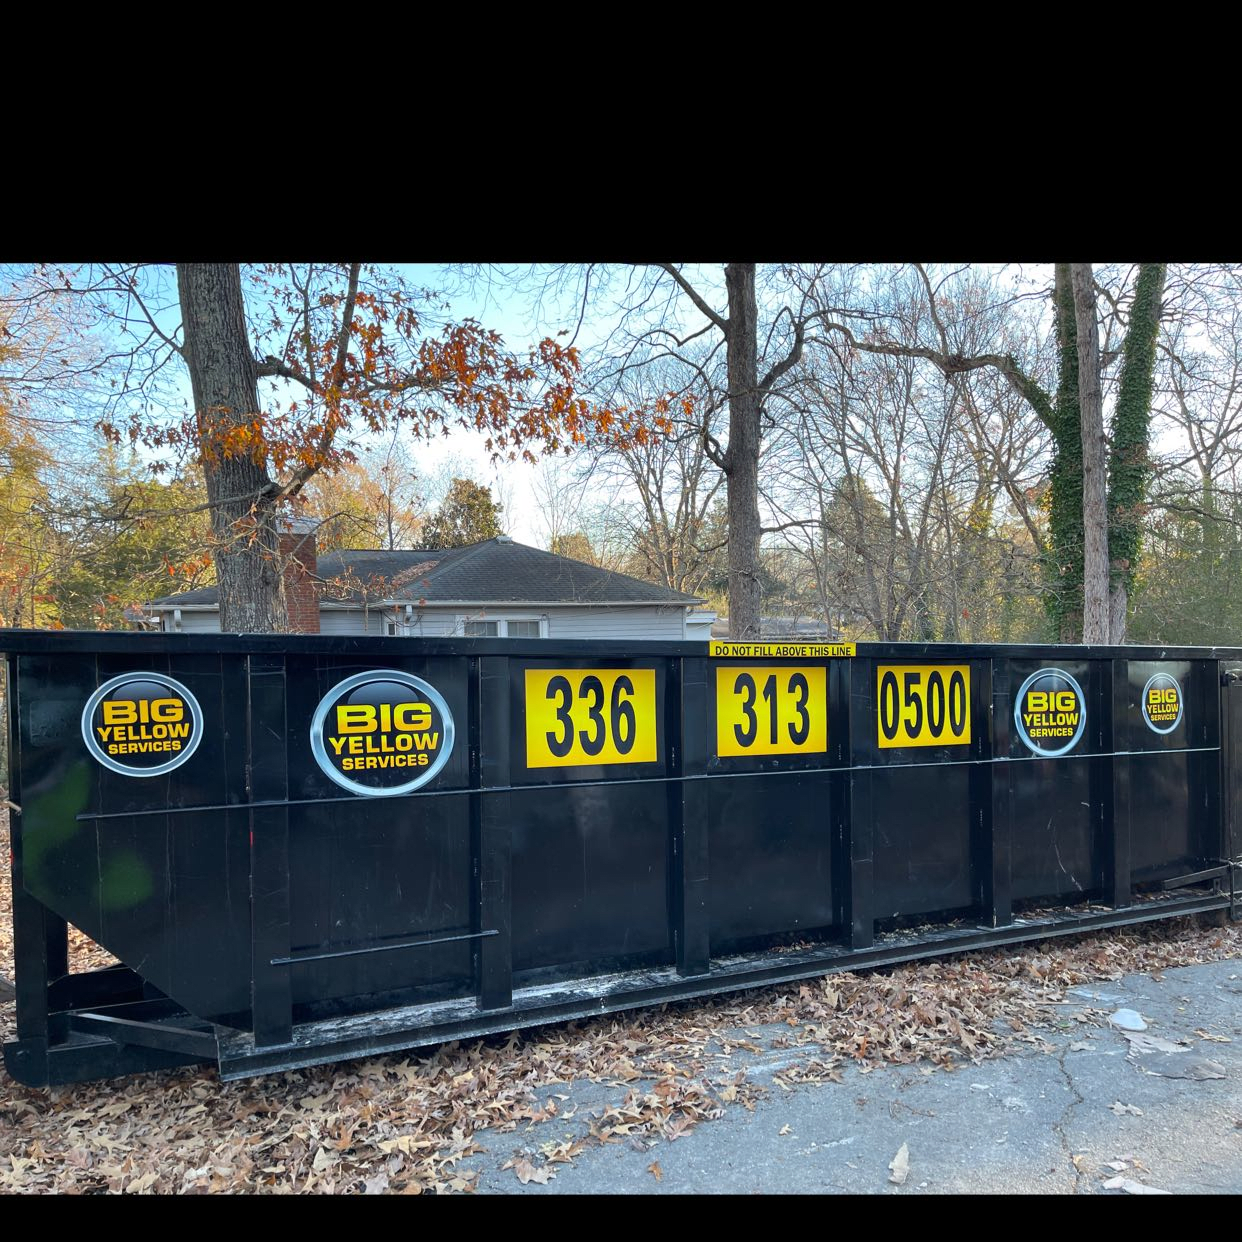 Asheboro, NC 27203 30yard dumpster rental services Terms of Use